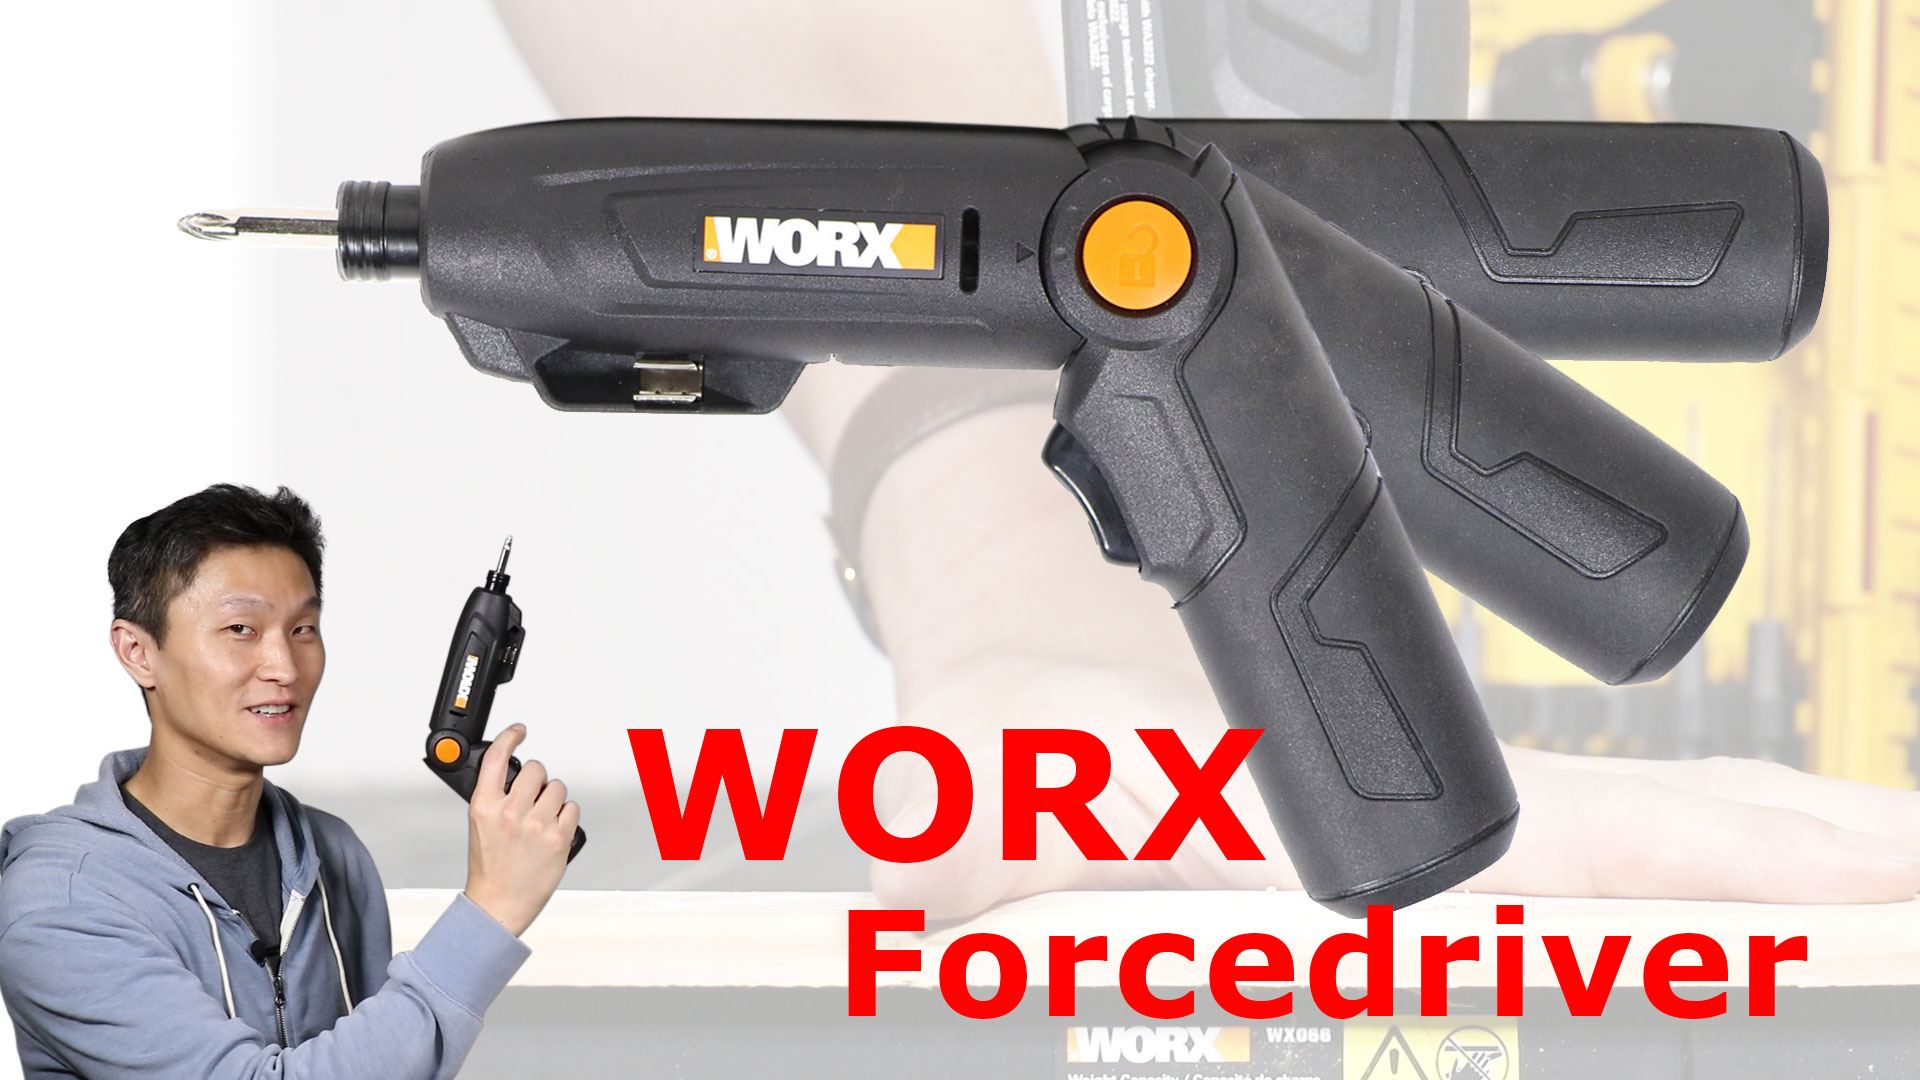 WORX Forcedriver video